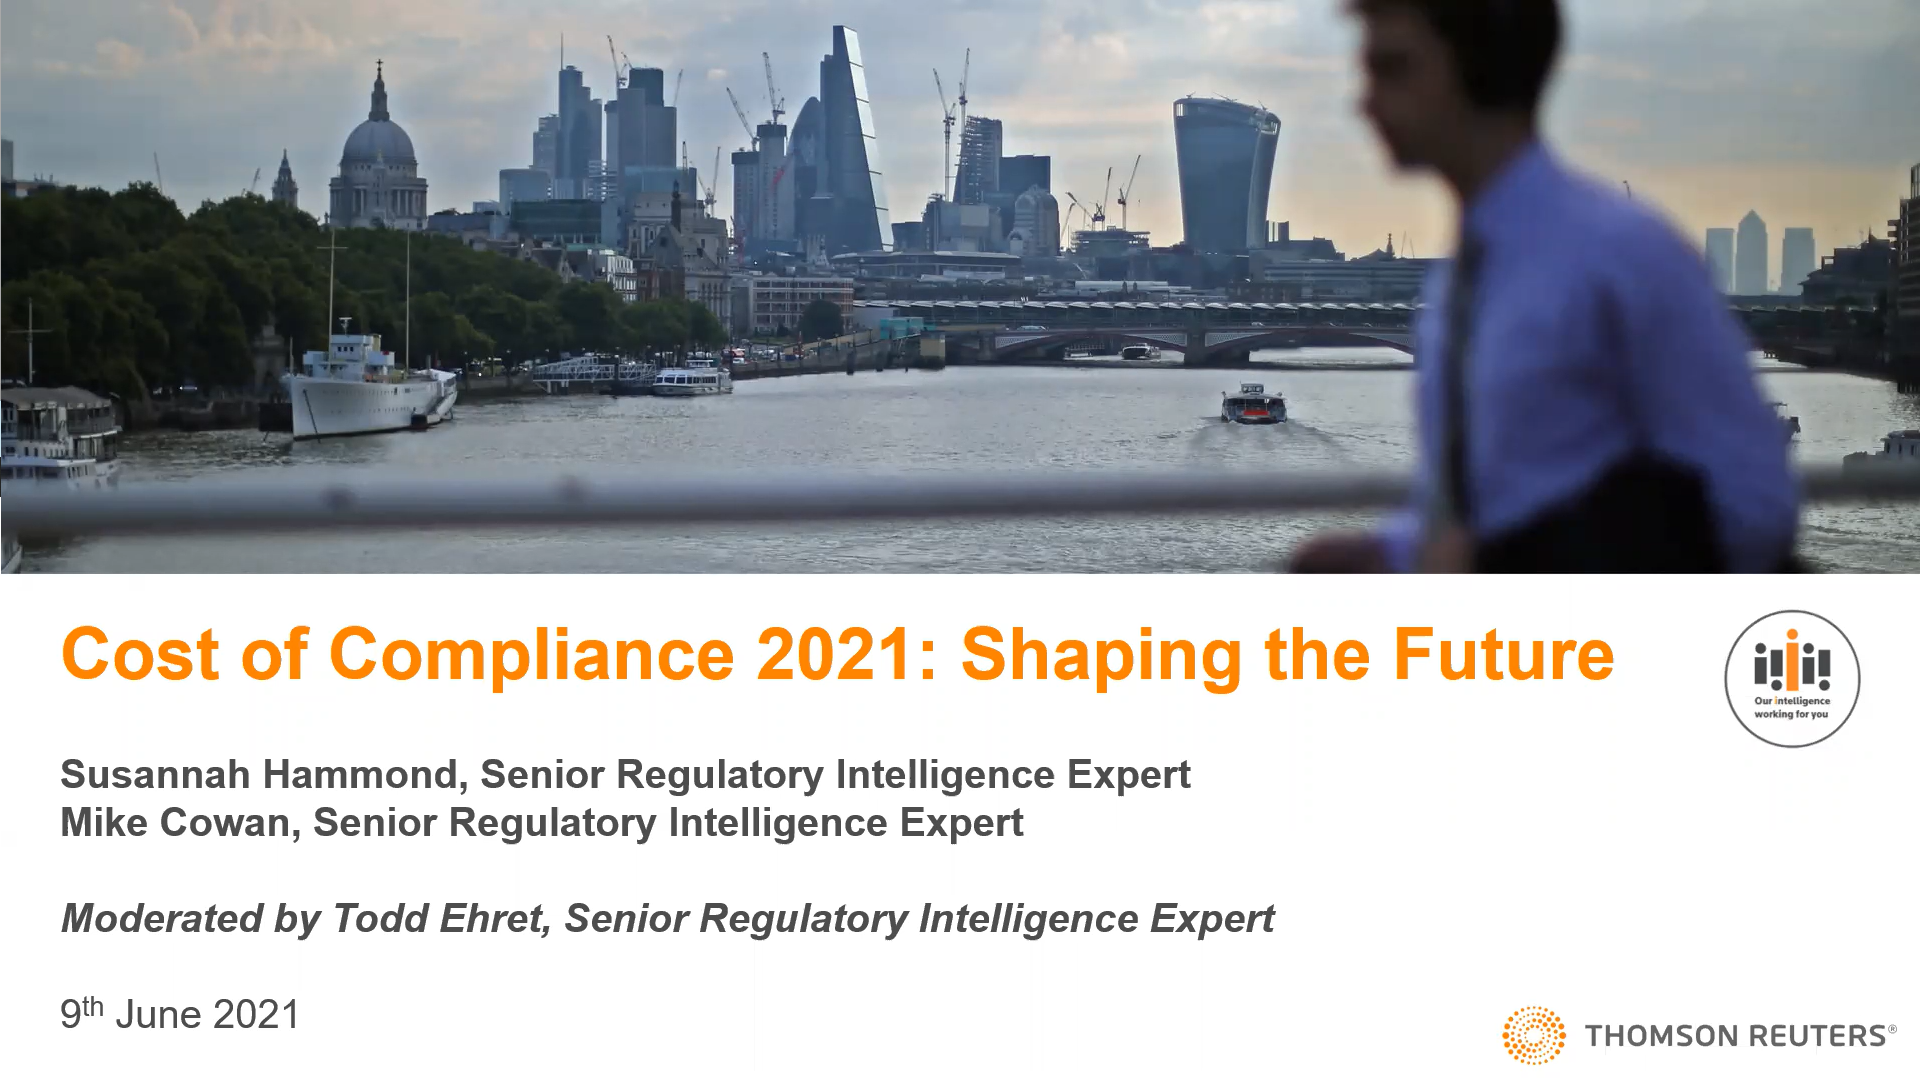 Cost of Compliance 2021 Shaping the Future webinar